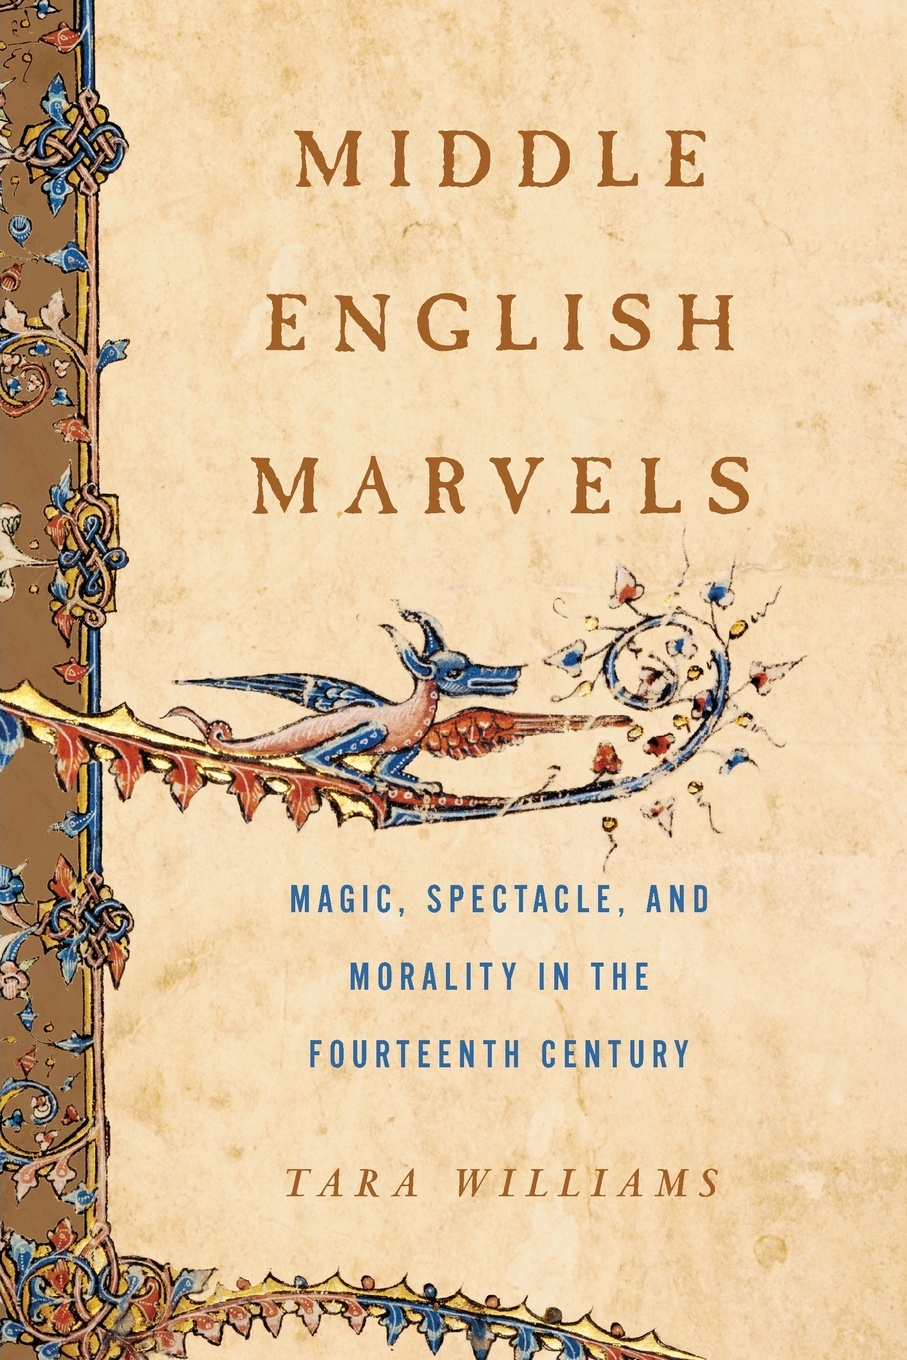 Middle English Marvels. Magic, Spectacle, and Morality in the Fourteenth Century